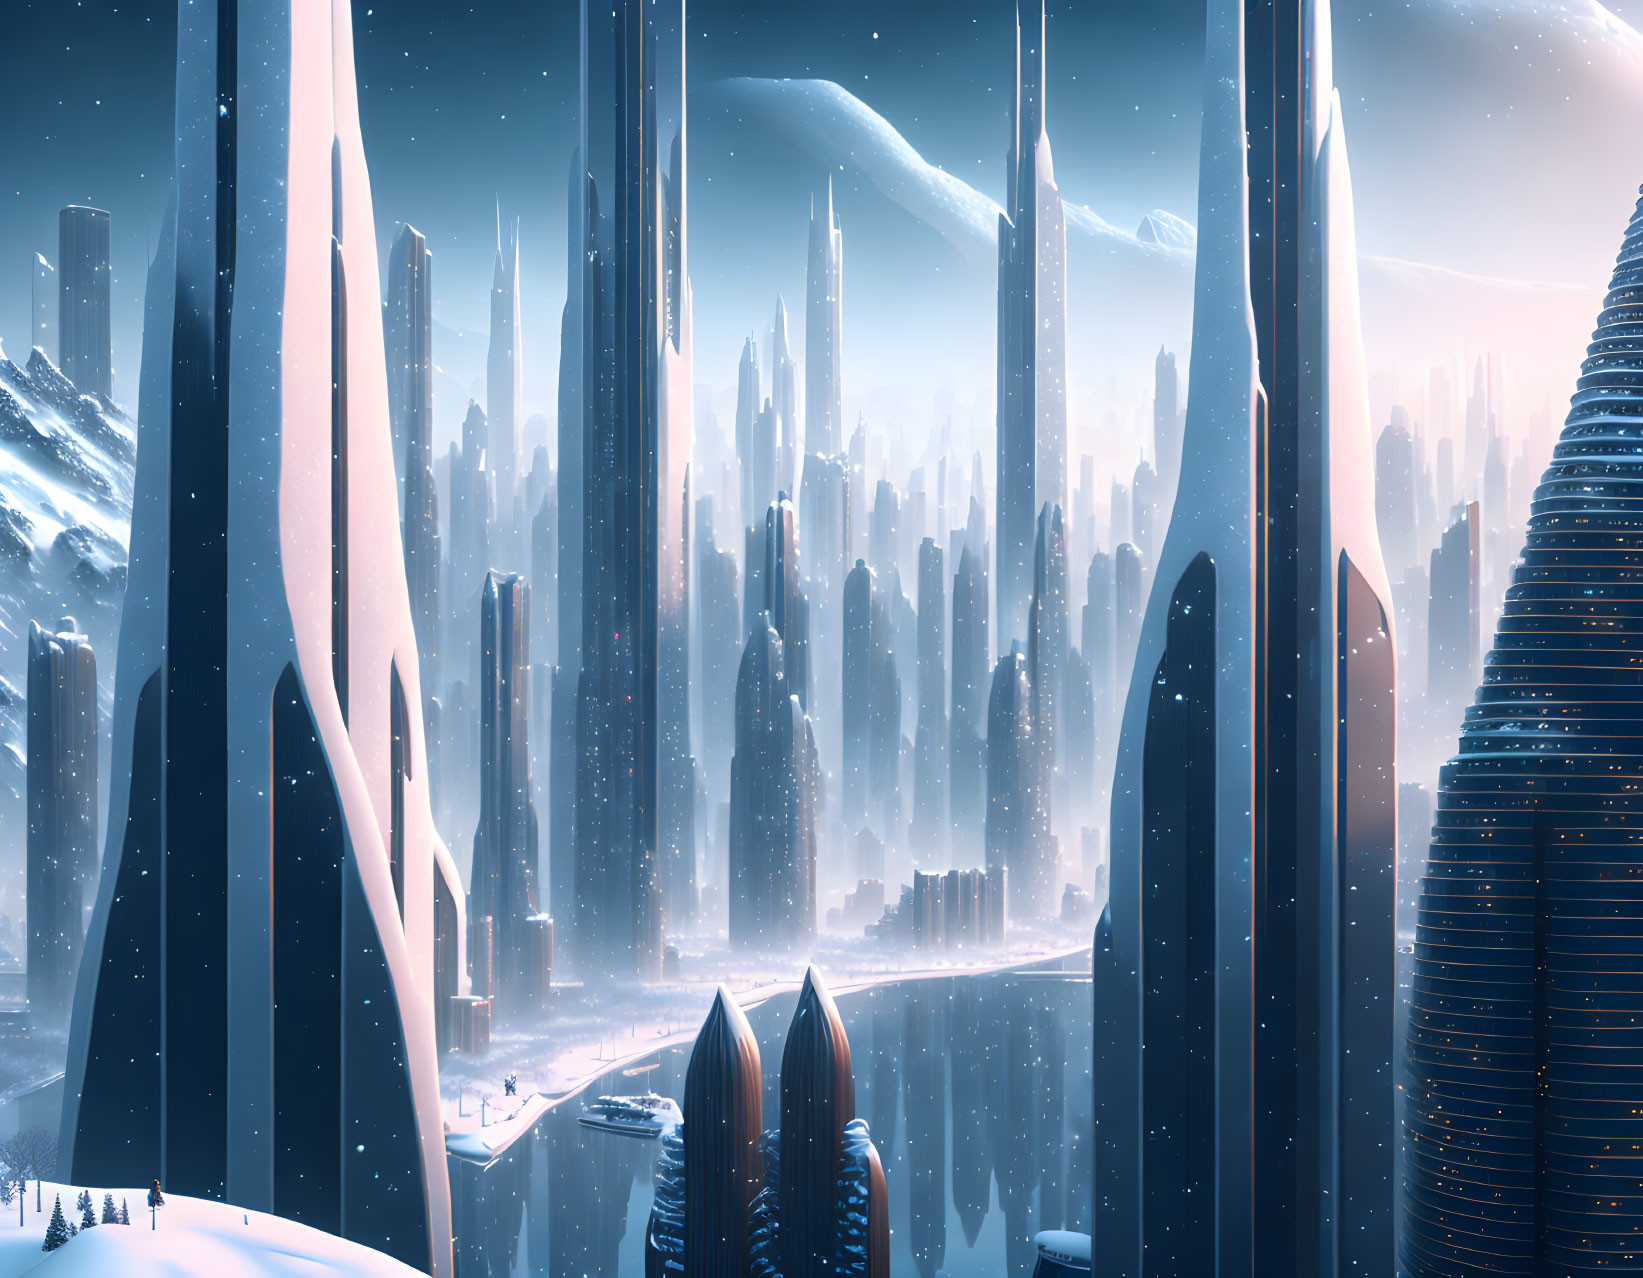 Futuristic cityscape with towering spires in snowy twilight